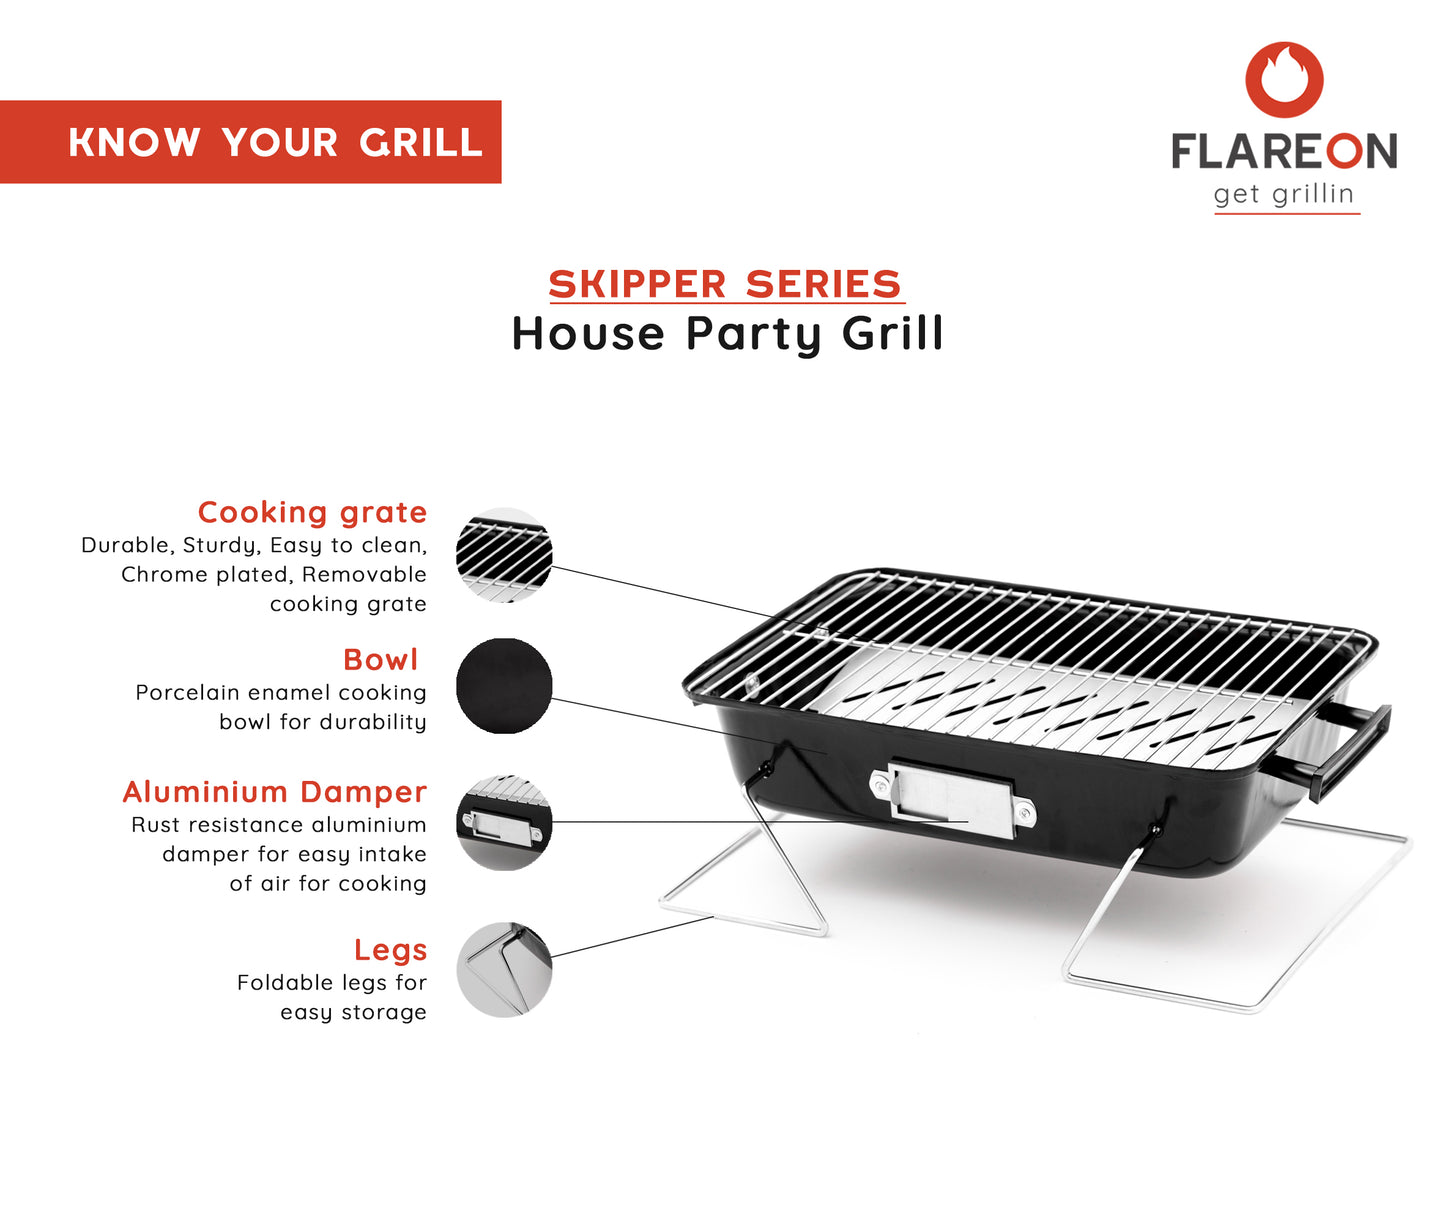 House Party Grill + Starter Kit